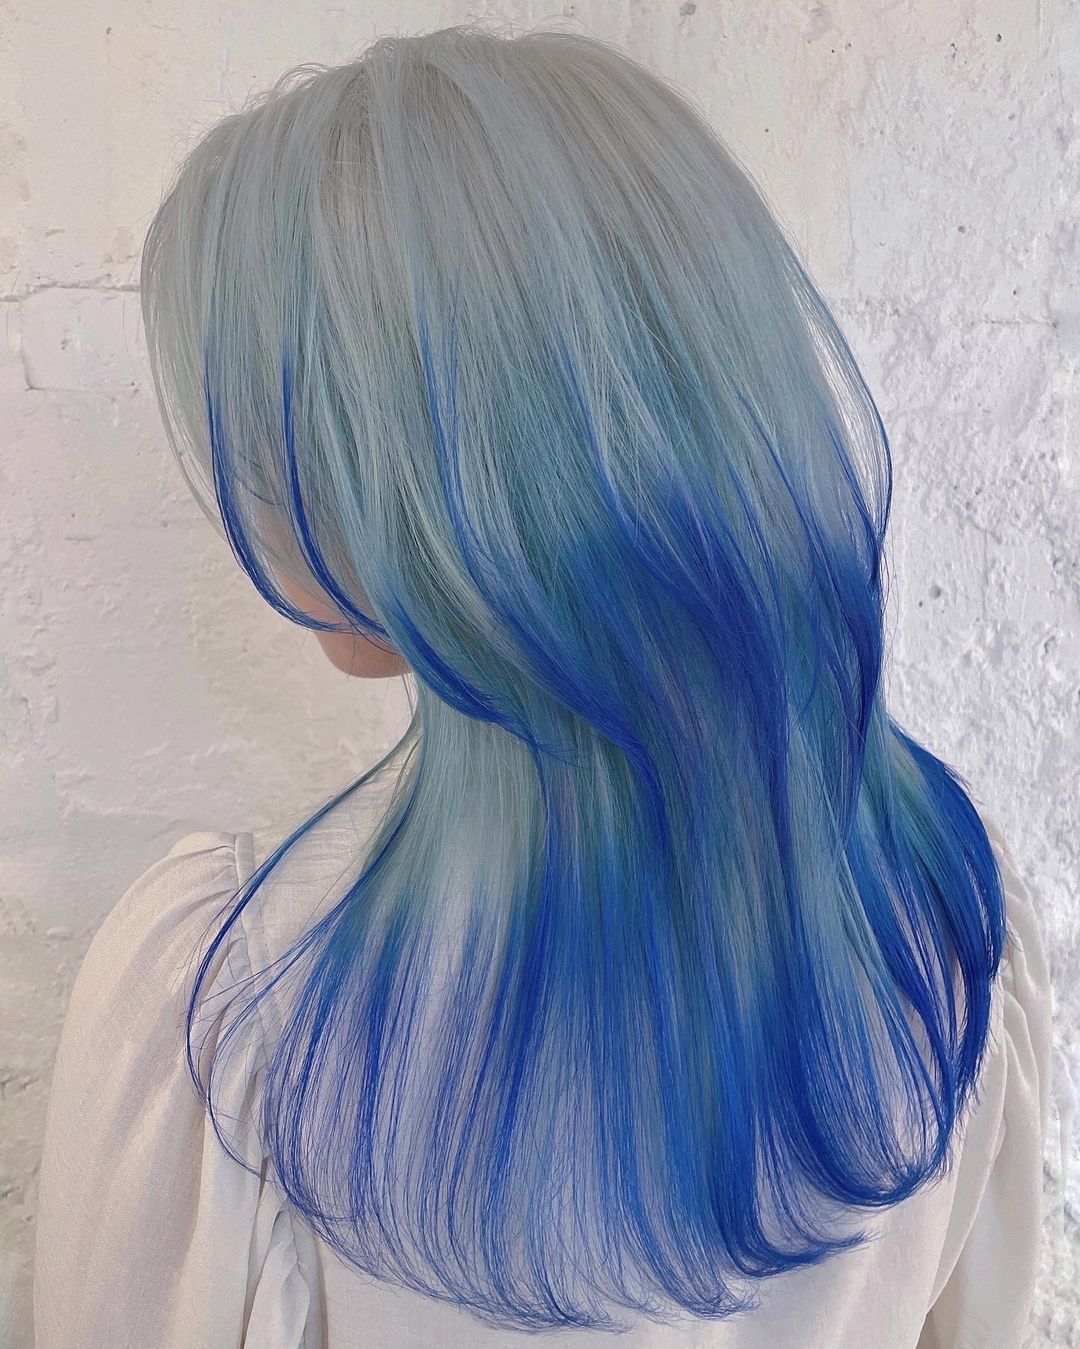 Blonde to Light Blue Reverse Ombre on Straight Hair